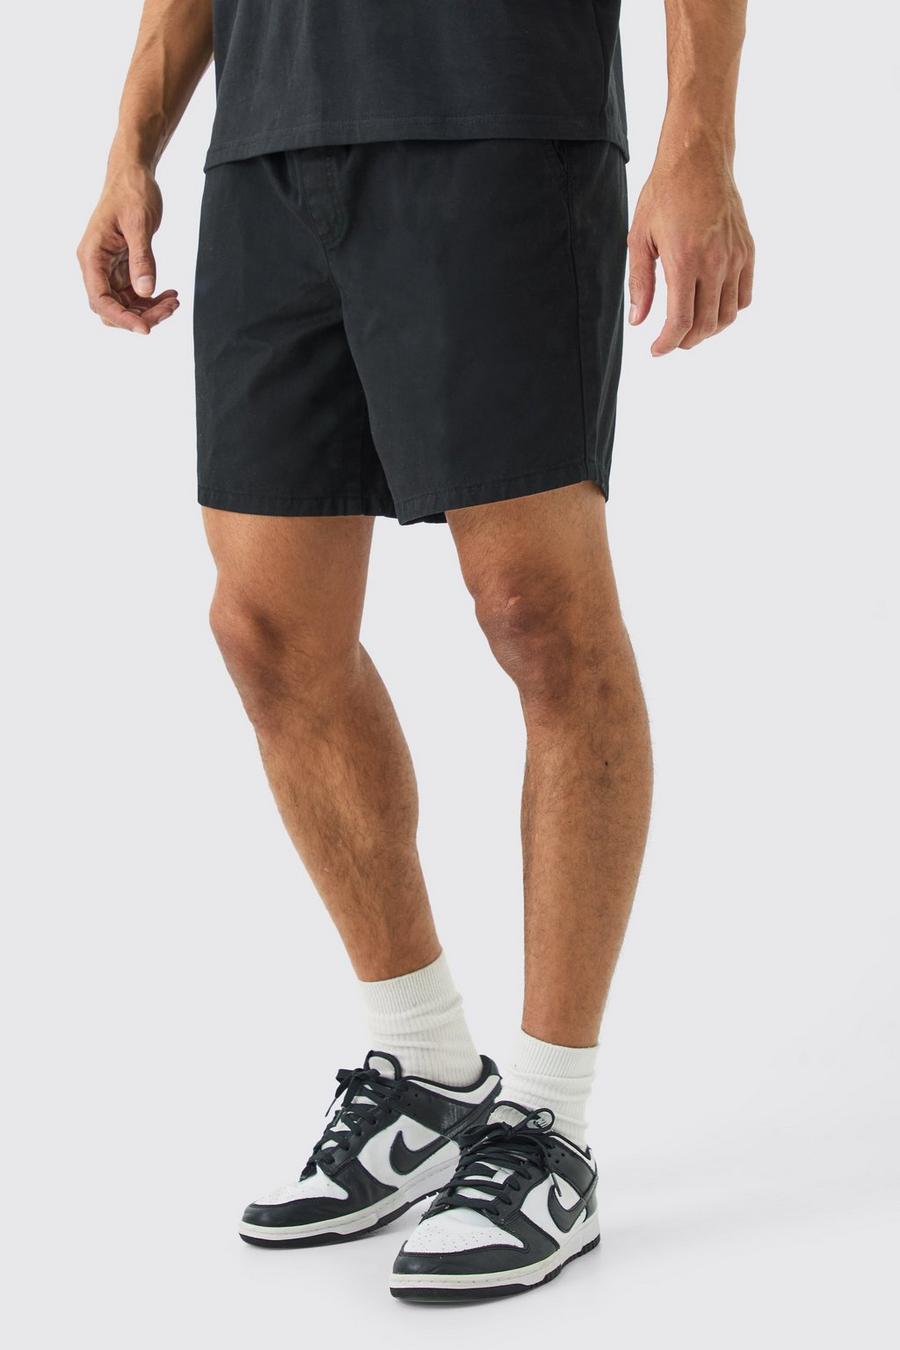 Shorter Length Relaxed Fit Elasticated Waist Chino Shorts in Black